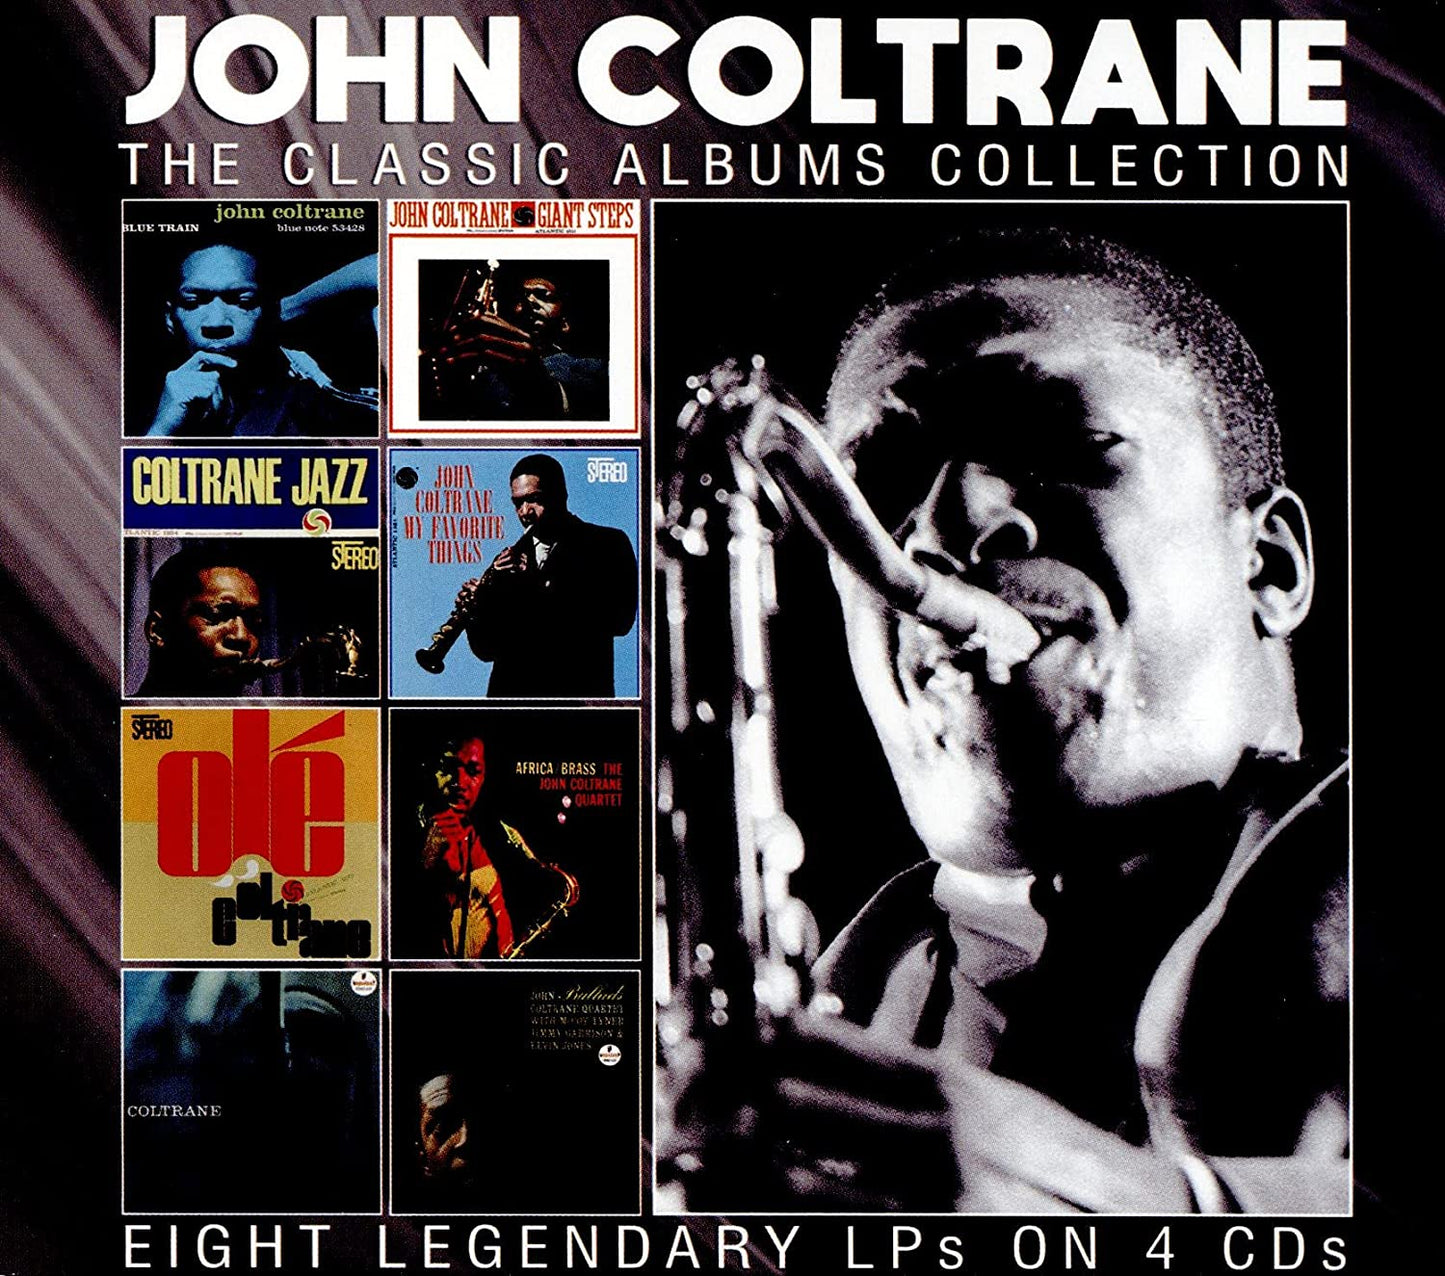 JOHN COLTRANE: THE CLASSIC ALBUMS COLLECTION (4 CDS)